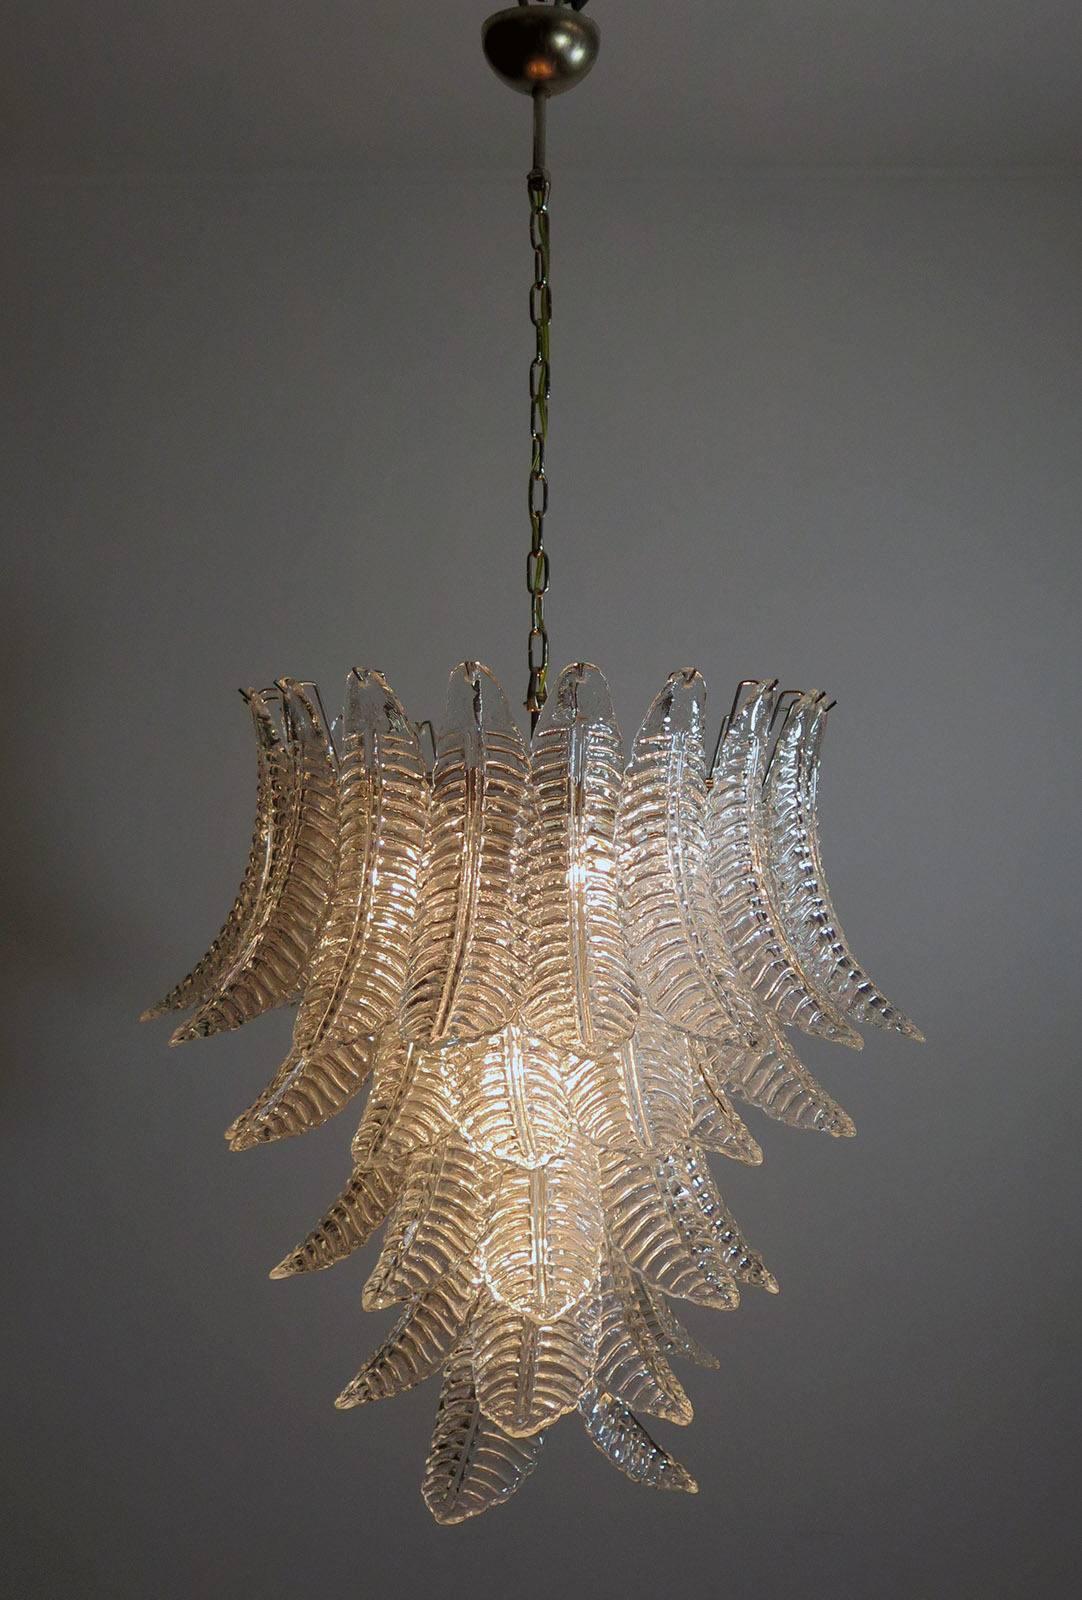 Late 20th Century Pair of Italian Leaves Chandeliers, Barovier and Toso Style, Murano